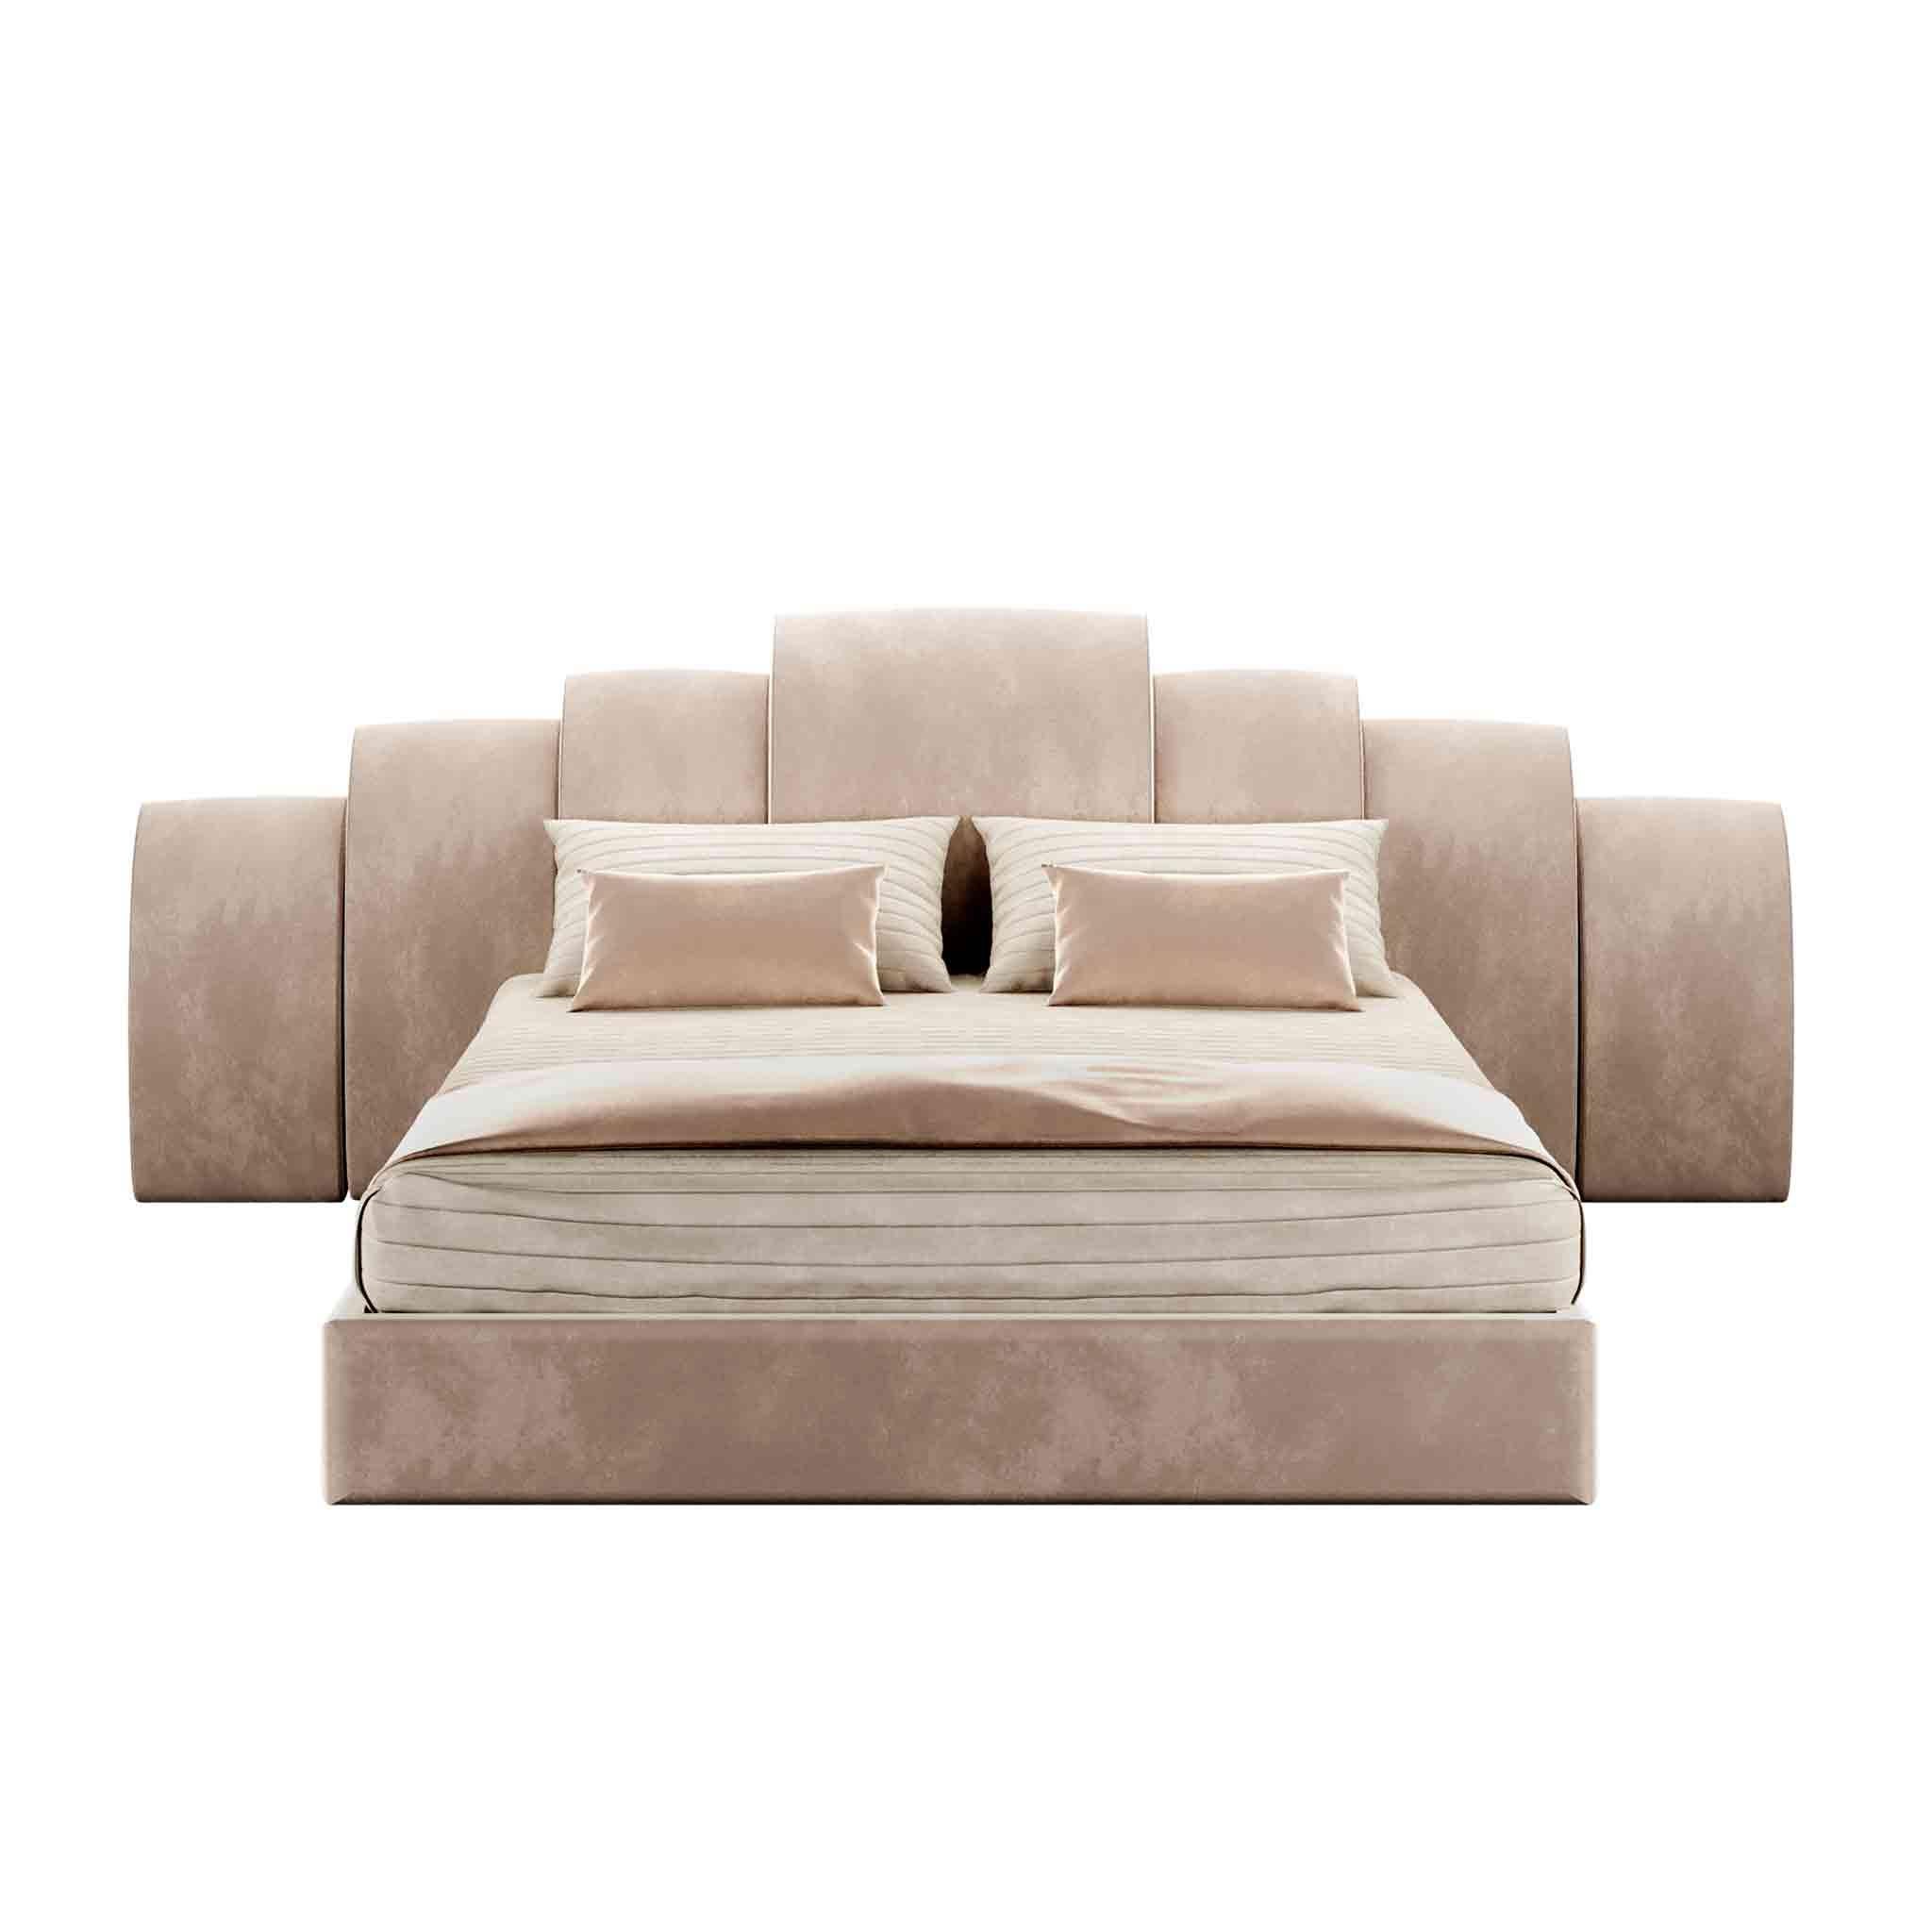 Kara Bed is a luxury design piece that stripped away any superfluous decoration searching for simplicity. A modern bed, upholstered in velvet,  is the best choice for a contemporary master bedroom design project.
The headboard can be sold